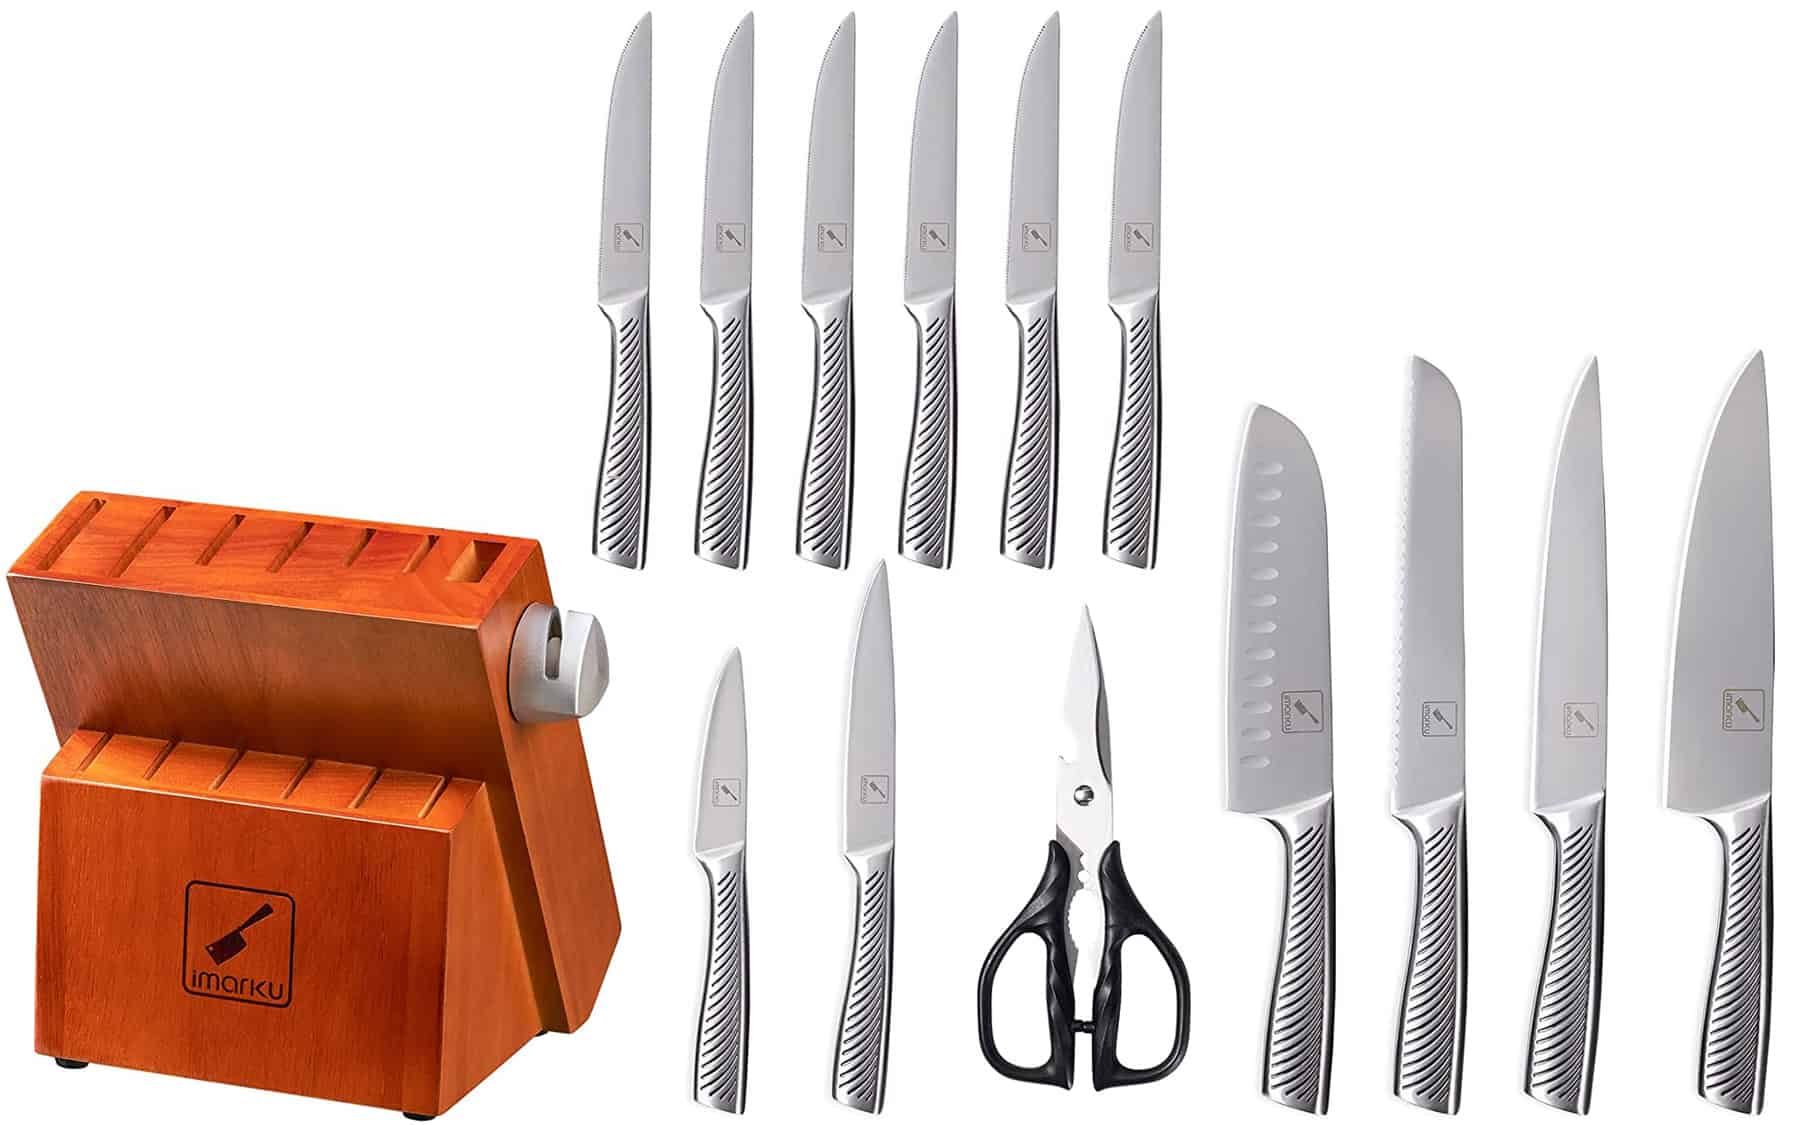 The Imarku 14 piece Dishwasher Safe Set is one of the few knife sets that can handle a dishwasher.